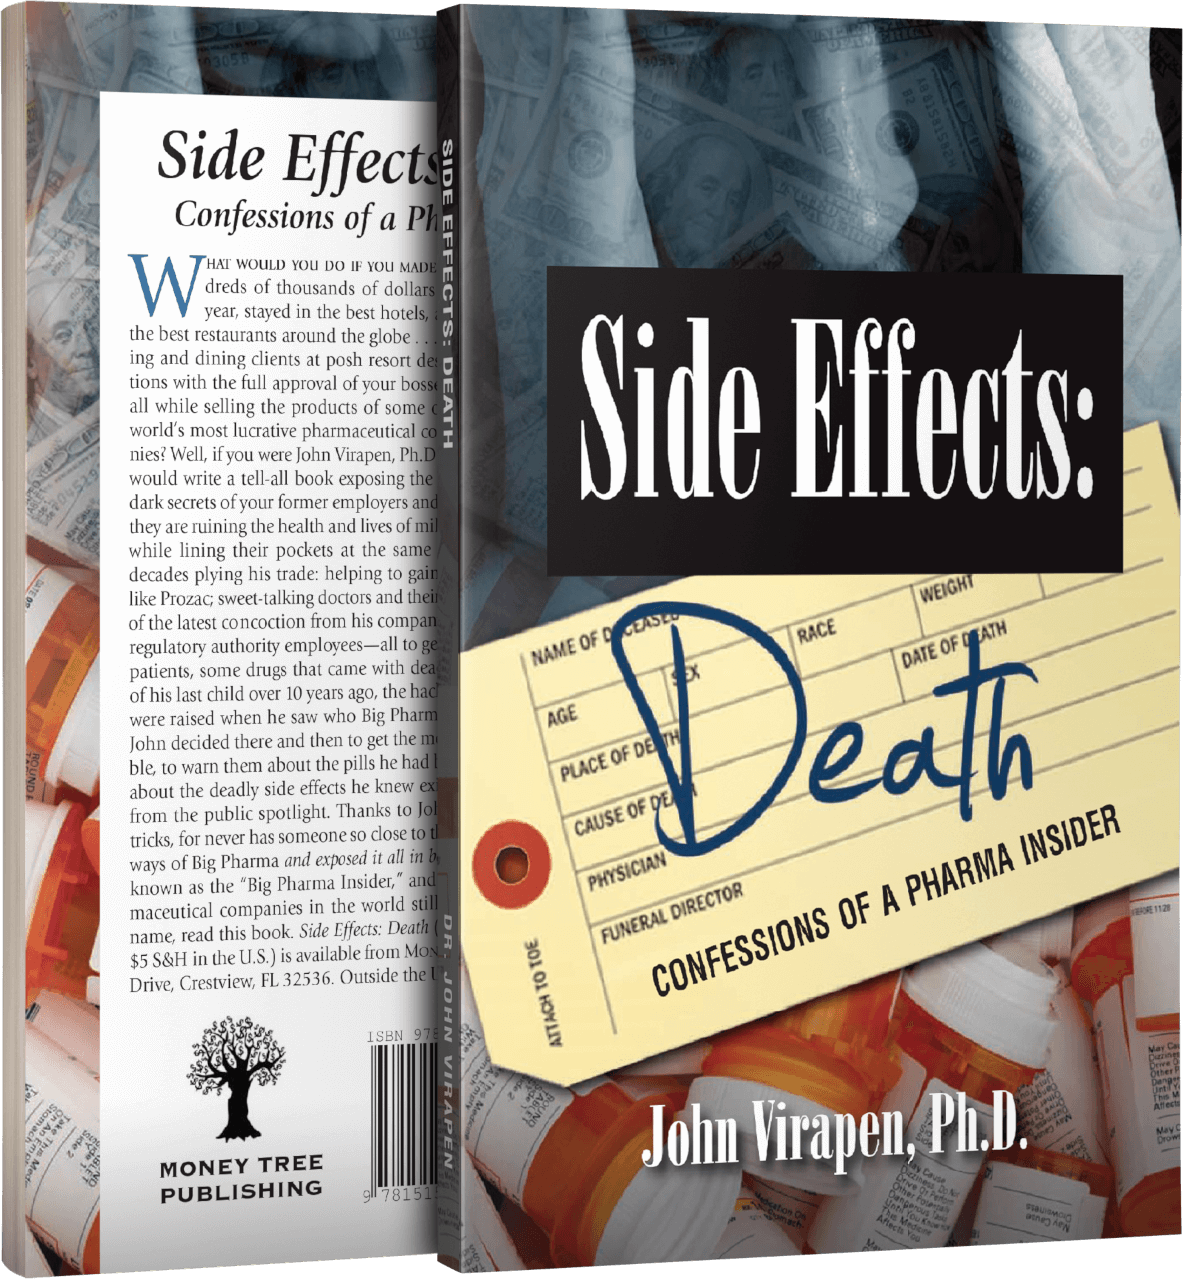 Side Effects: Death—Confessions of a Pharma Insider